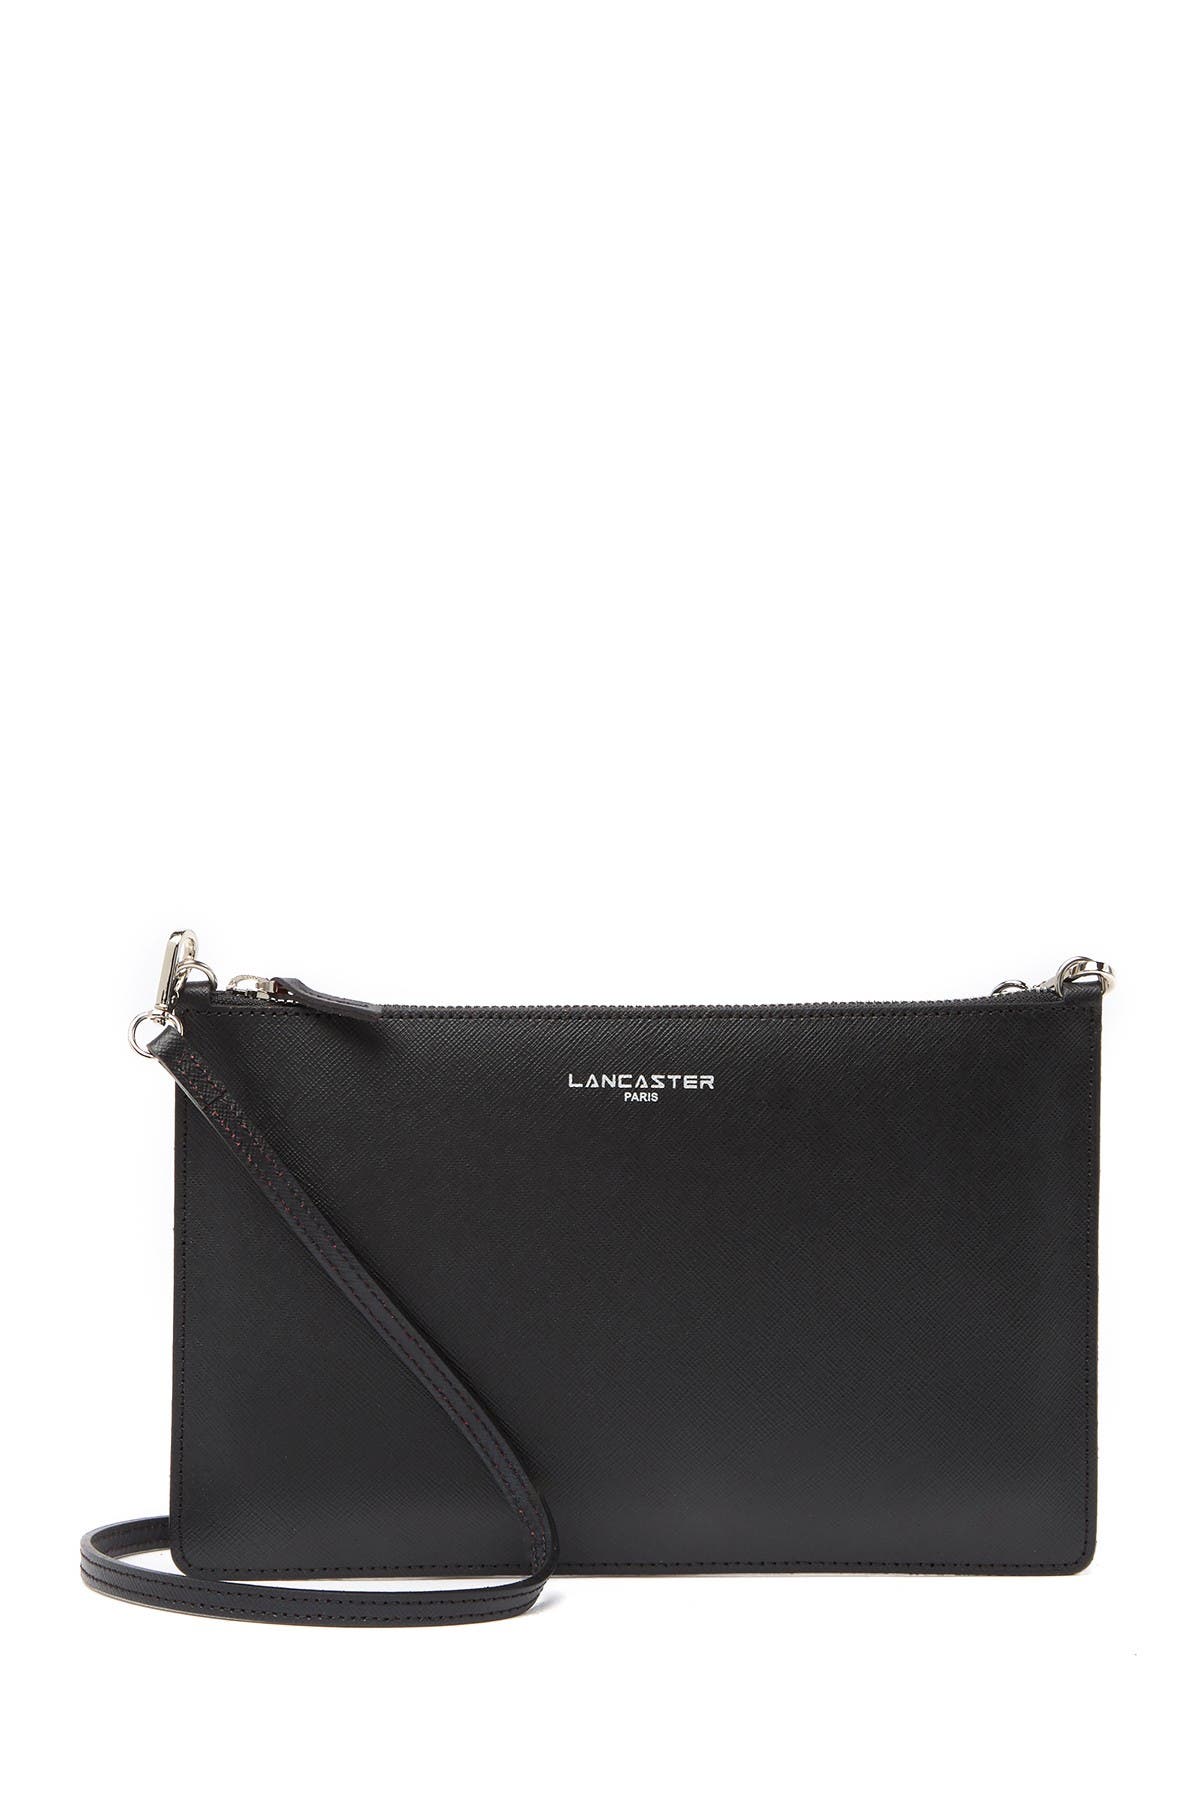 Lancaster Saffiano Element Leather Crossbody Bag In Oxford